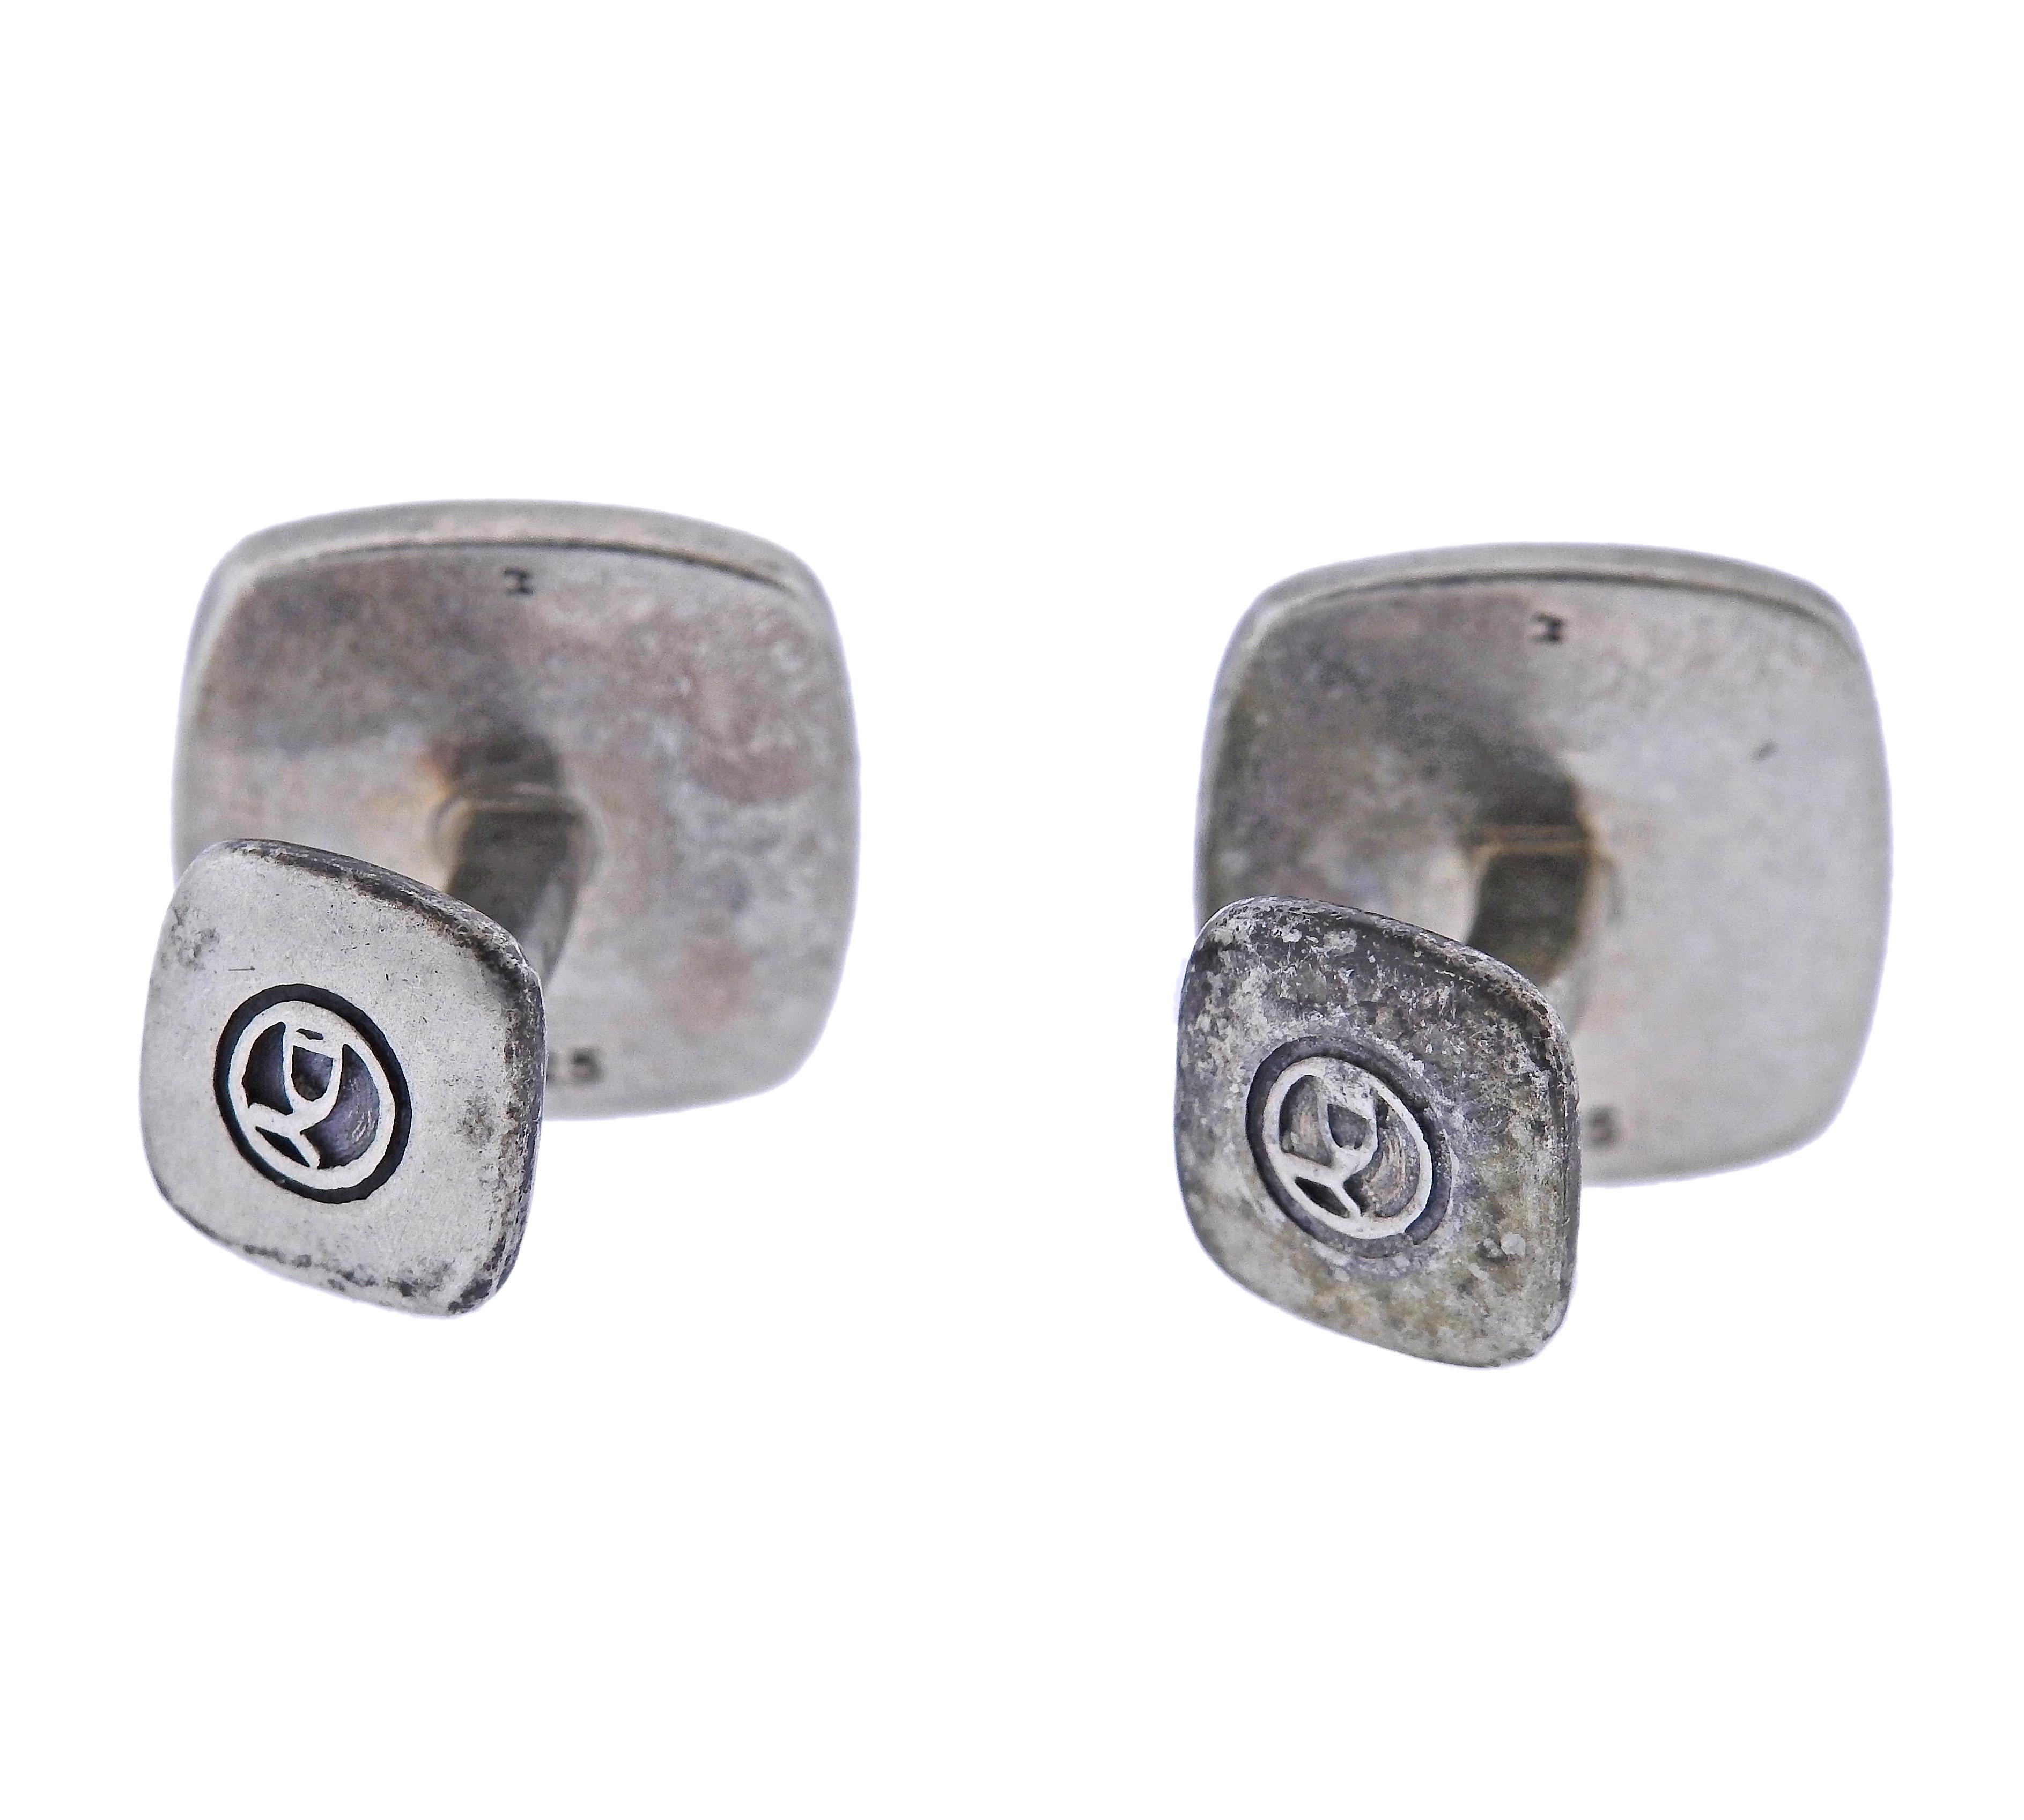 Pair of square sterling silver cufflinks. Each top is 18 x 18mm. Marked: D.Y., 925. Weight - 21.2 grams.